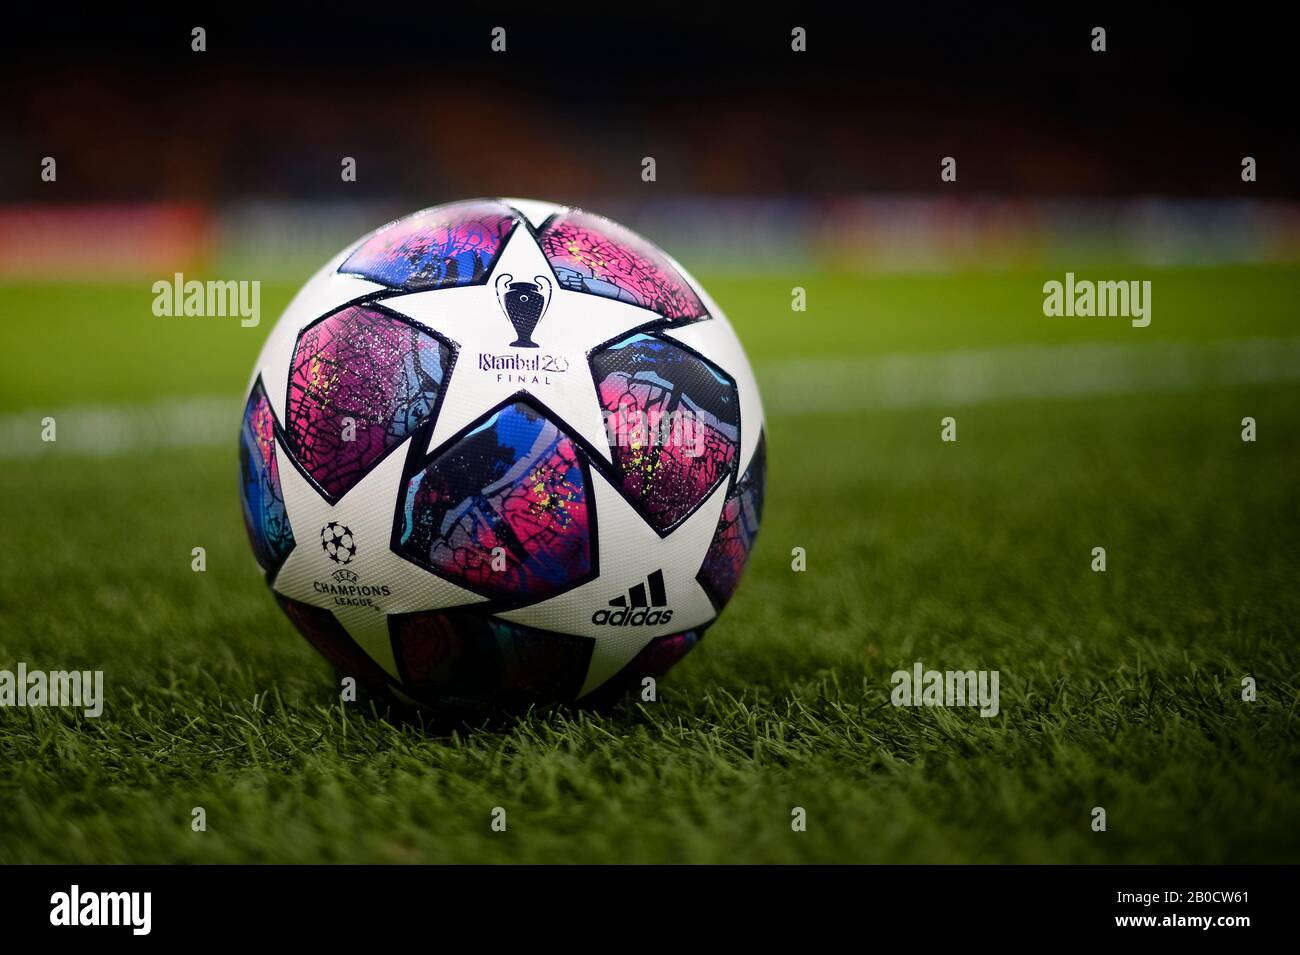 Milan, Italy - 19 February, 2020: The 'Istanbul 20' official Adidas match  ball for 2020 UEFA Champions League final is pictured prior to the UEFA  Champions League round of 16 first leg